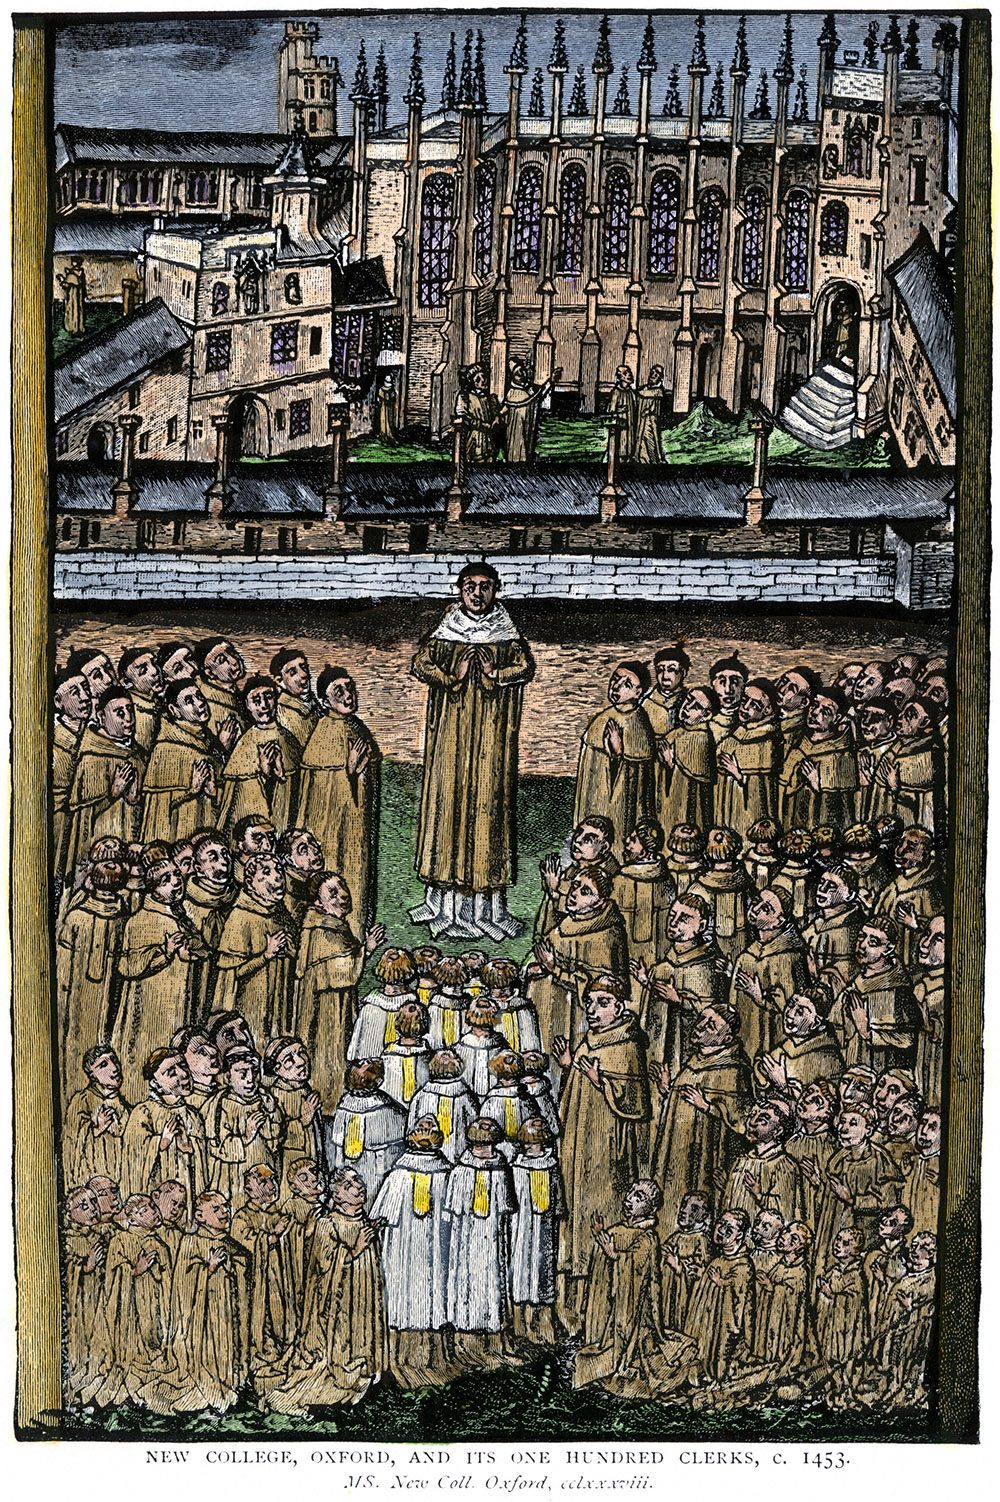 New College Oxford University and its one hundred clerics c.1453.